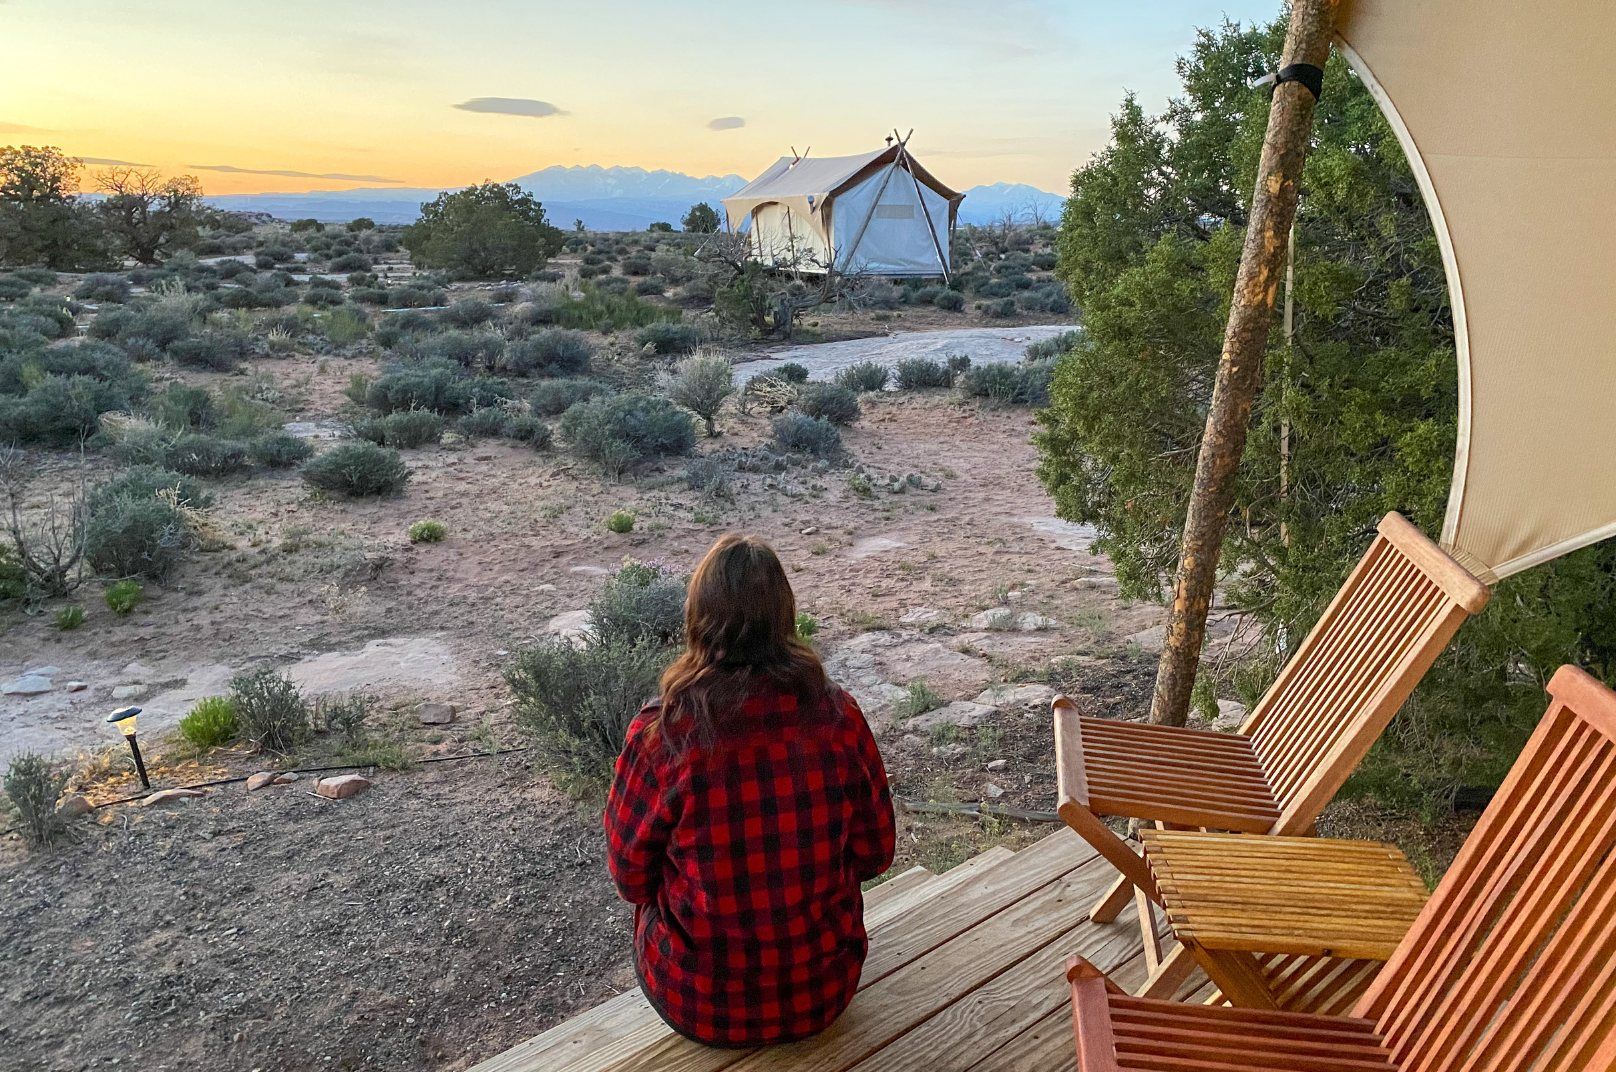 Arches National Park Airbnbs